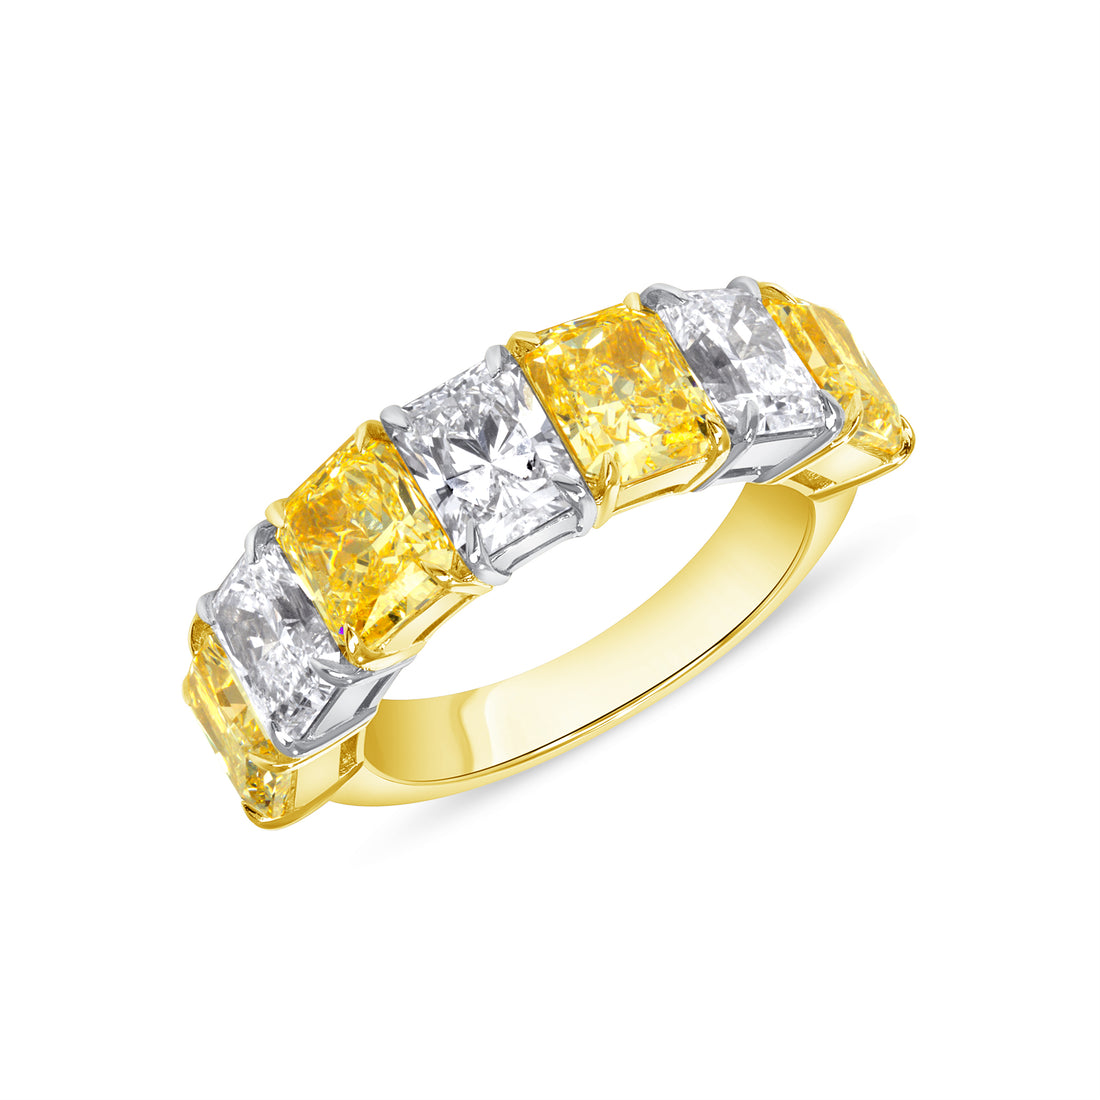 6.20 CT. Fancy Light Yellow Diamond and Radiant Cut Diamond Half Eternity Band in 18K Yellow Gold and Platinum